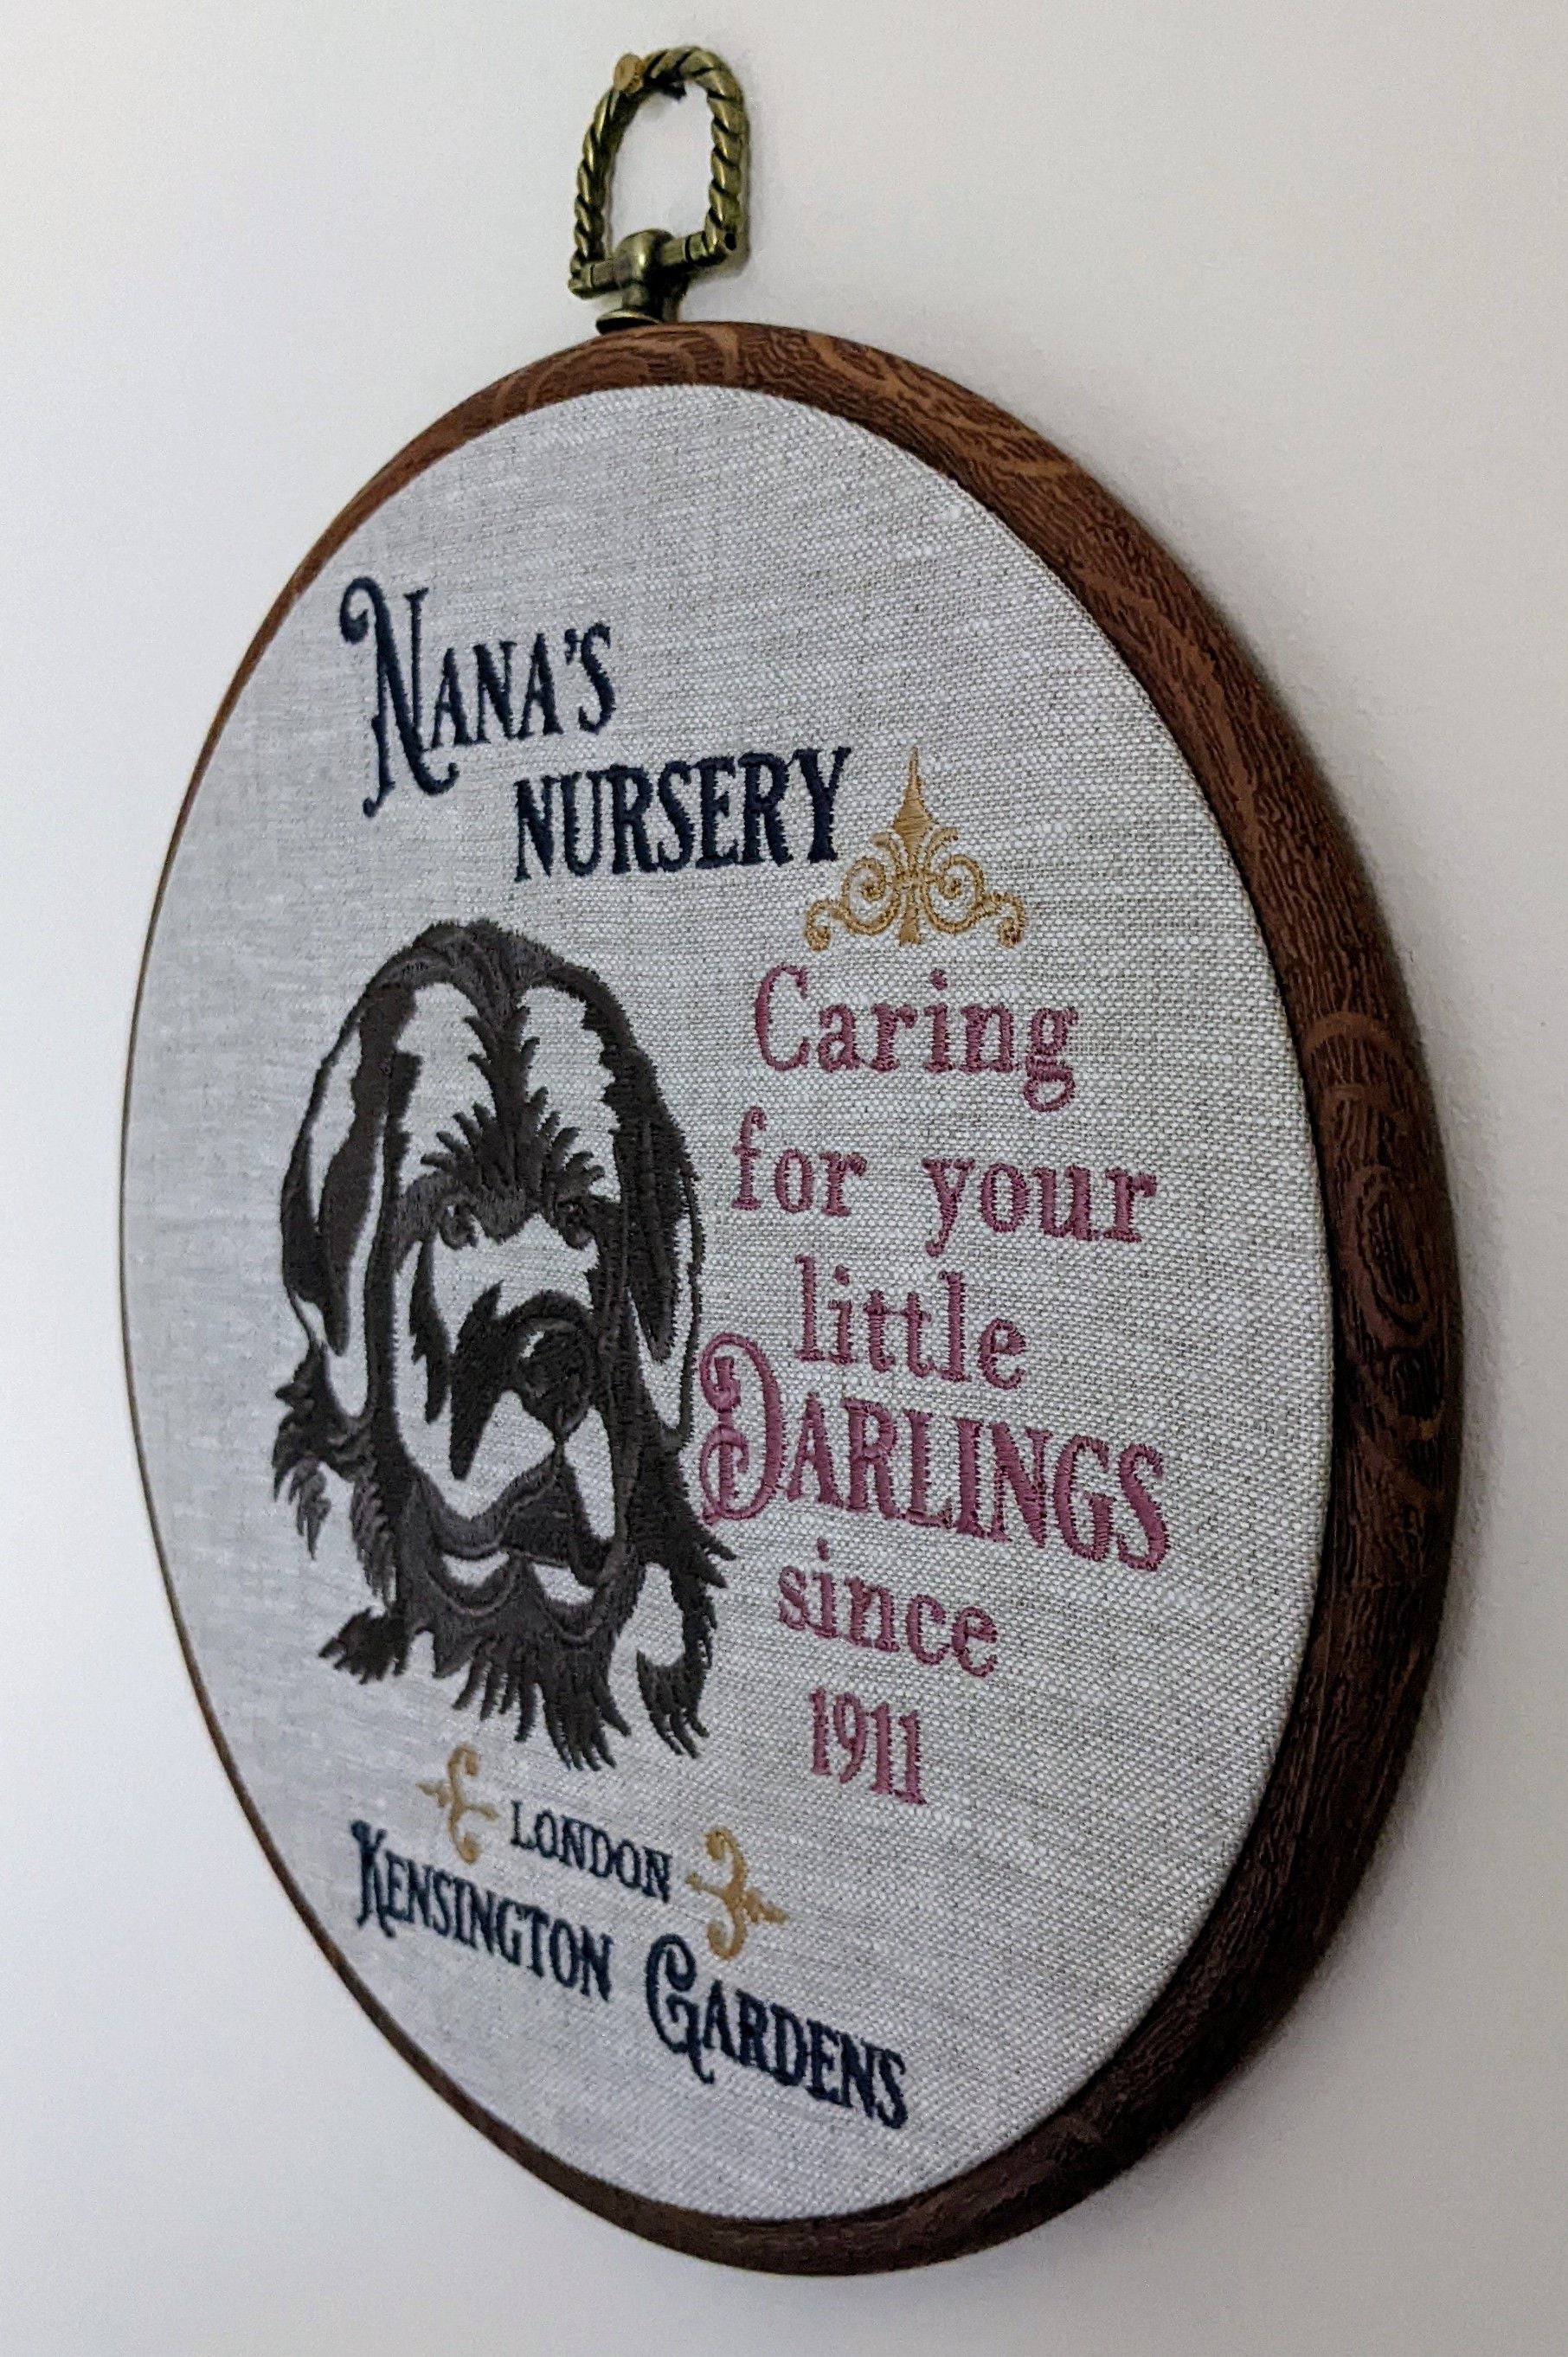 Nana's nursery, inspired from the book of Peter Pan. Machine embroidered hoop 8"